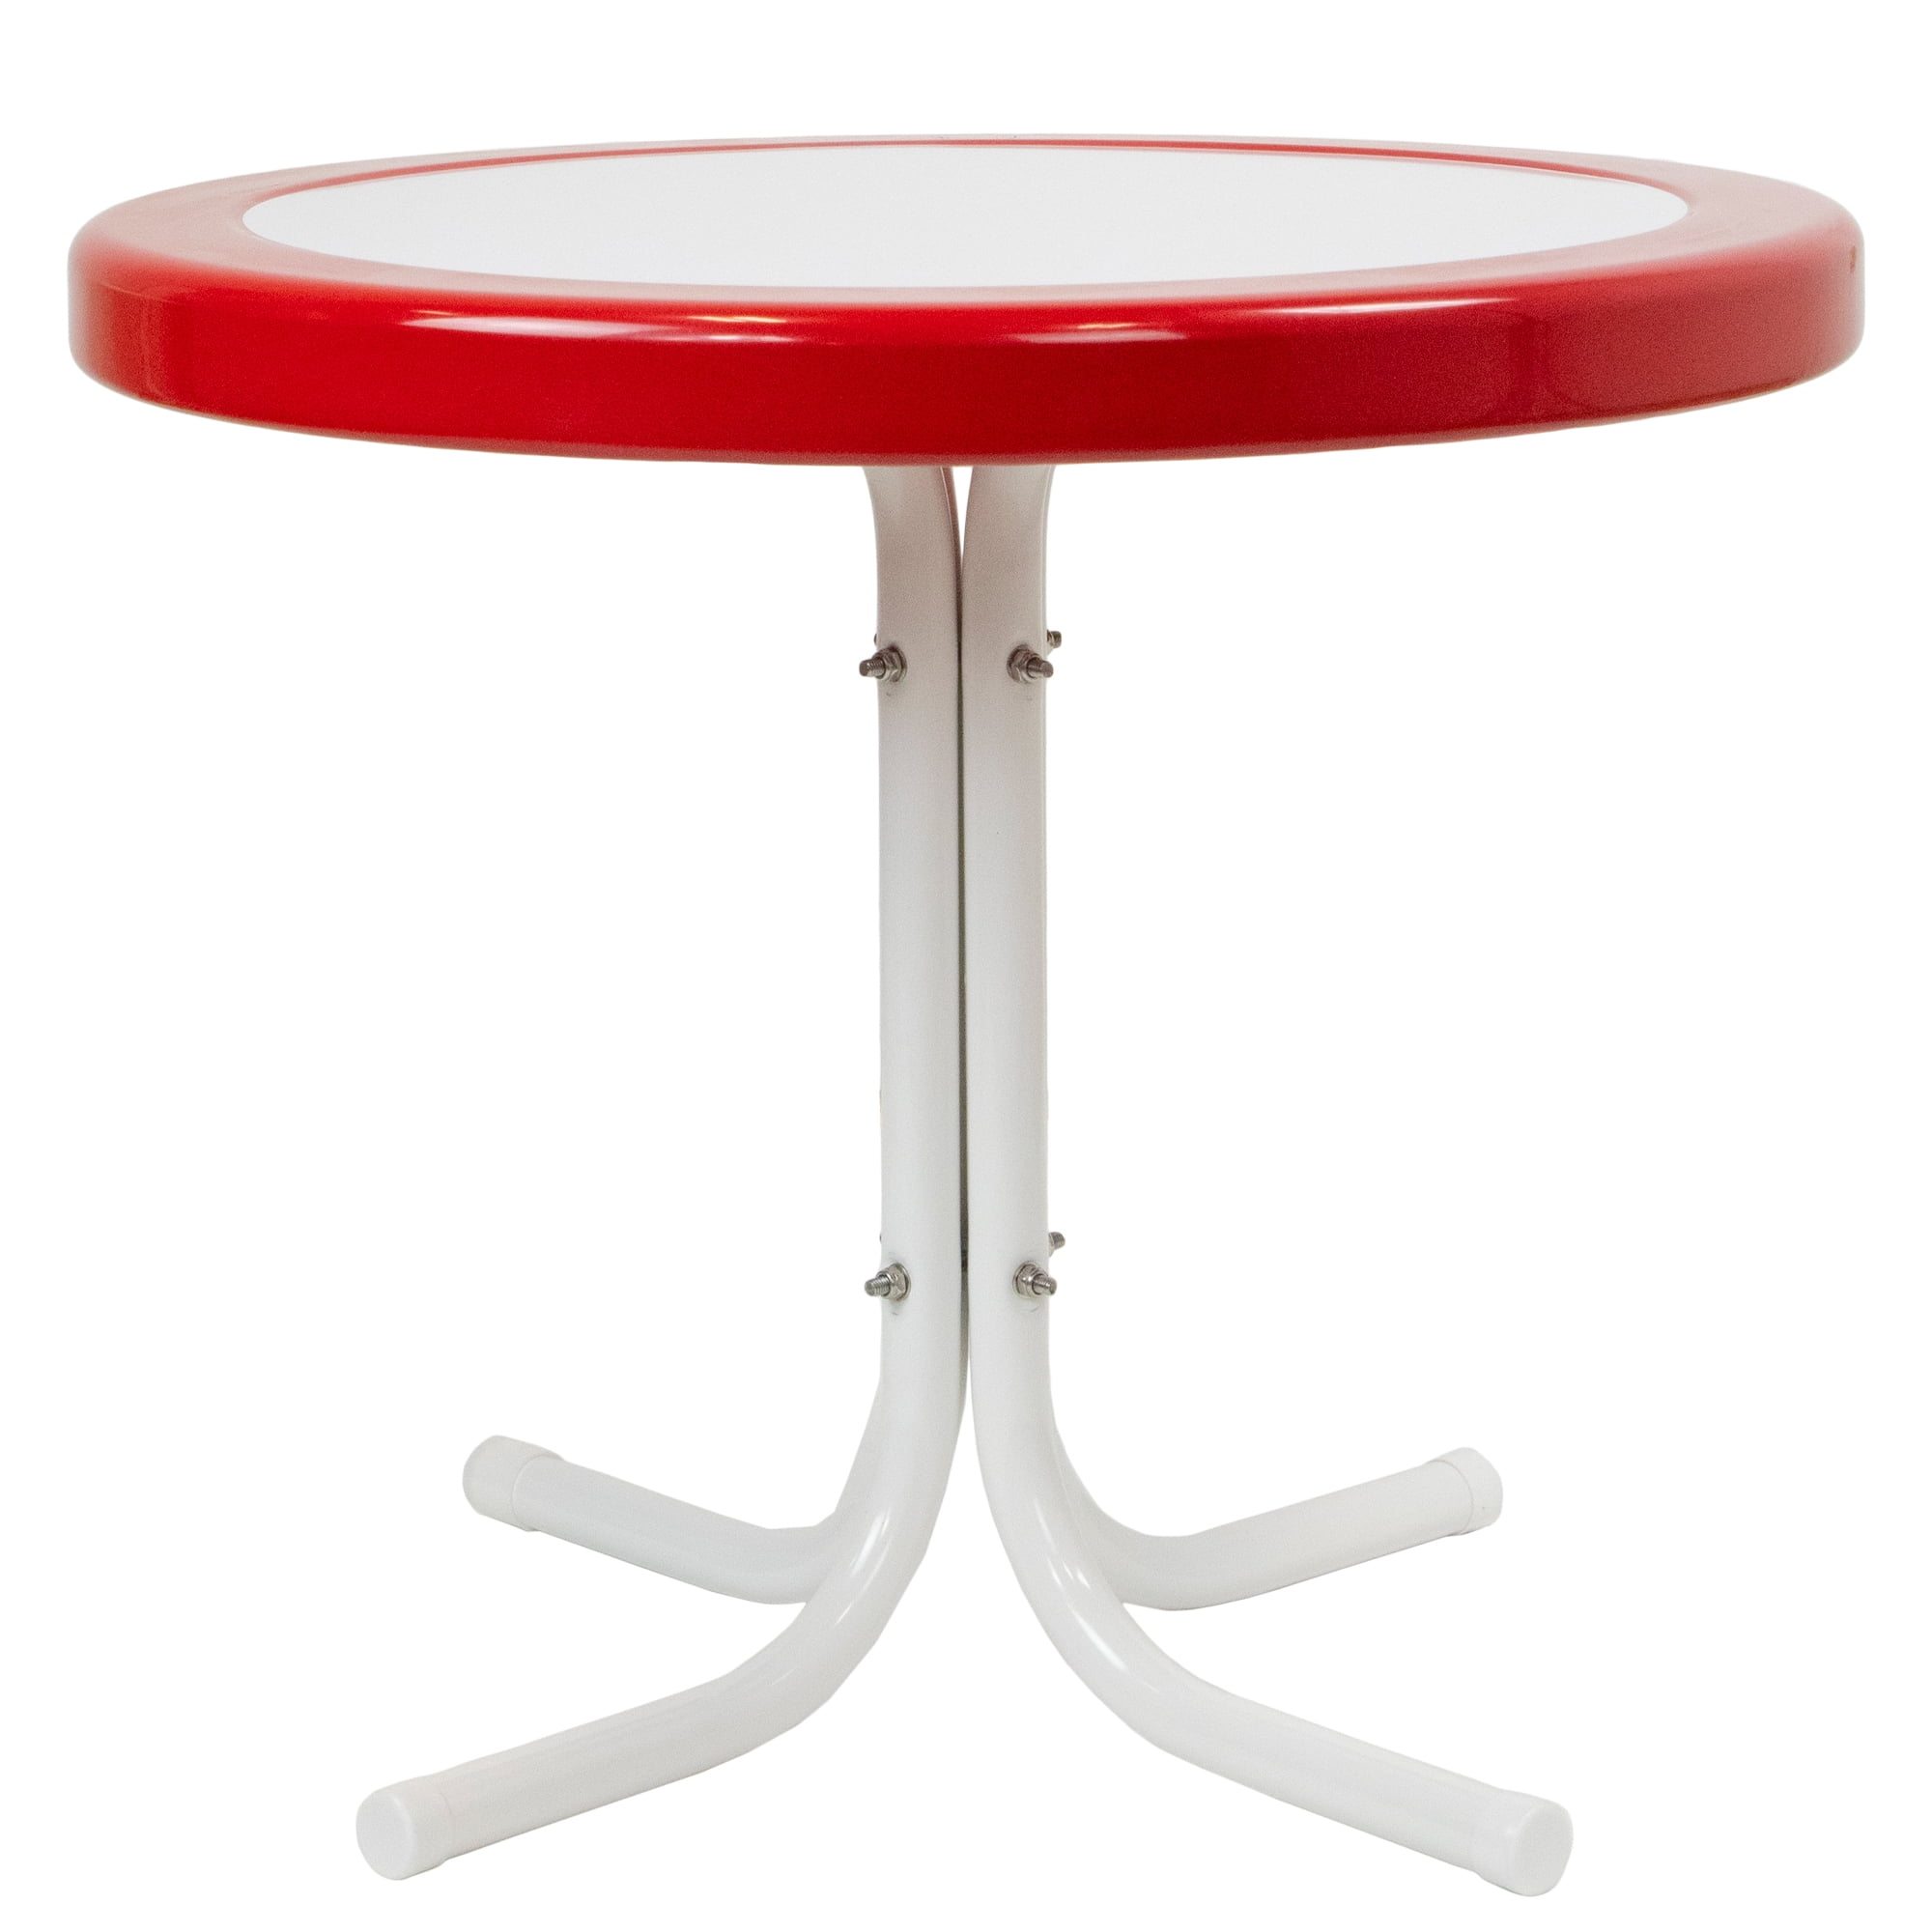 Kate and Laurel Celia Round Metal Foldable Accent Table, 15 x 26